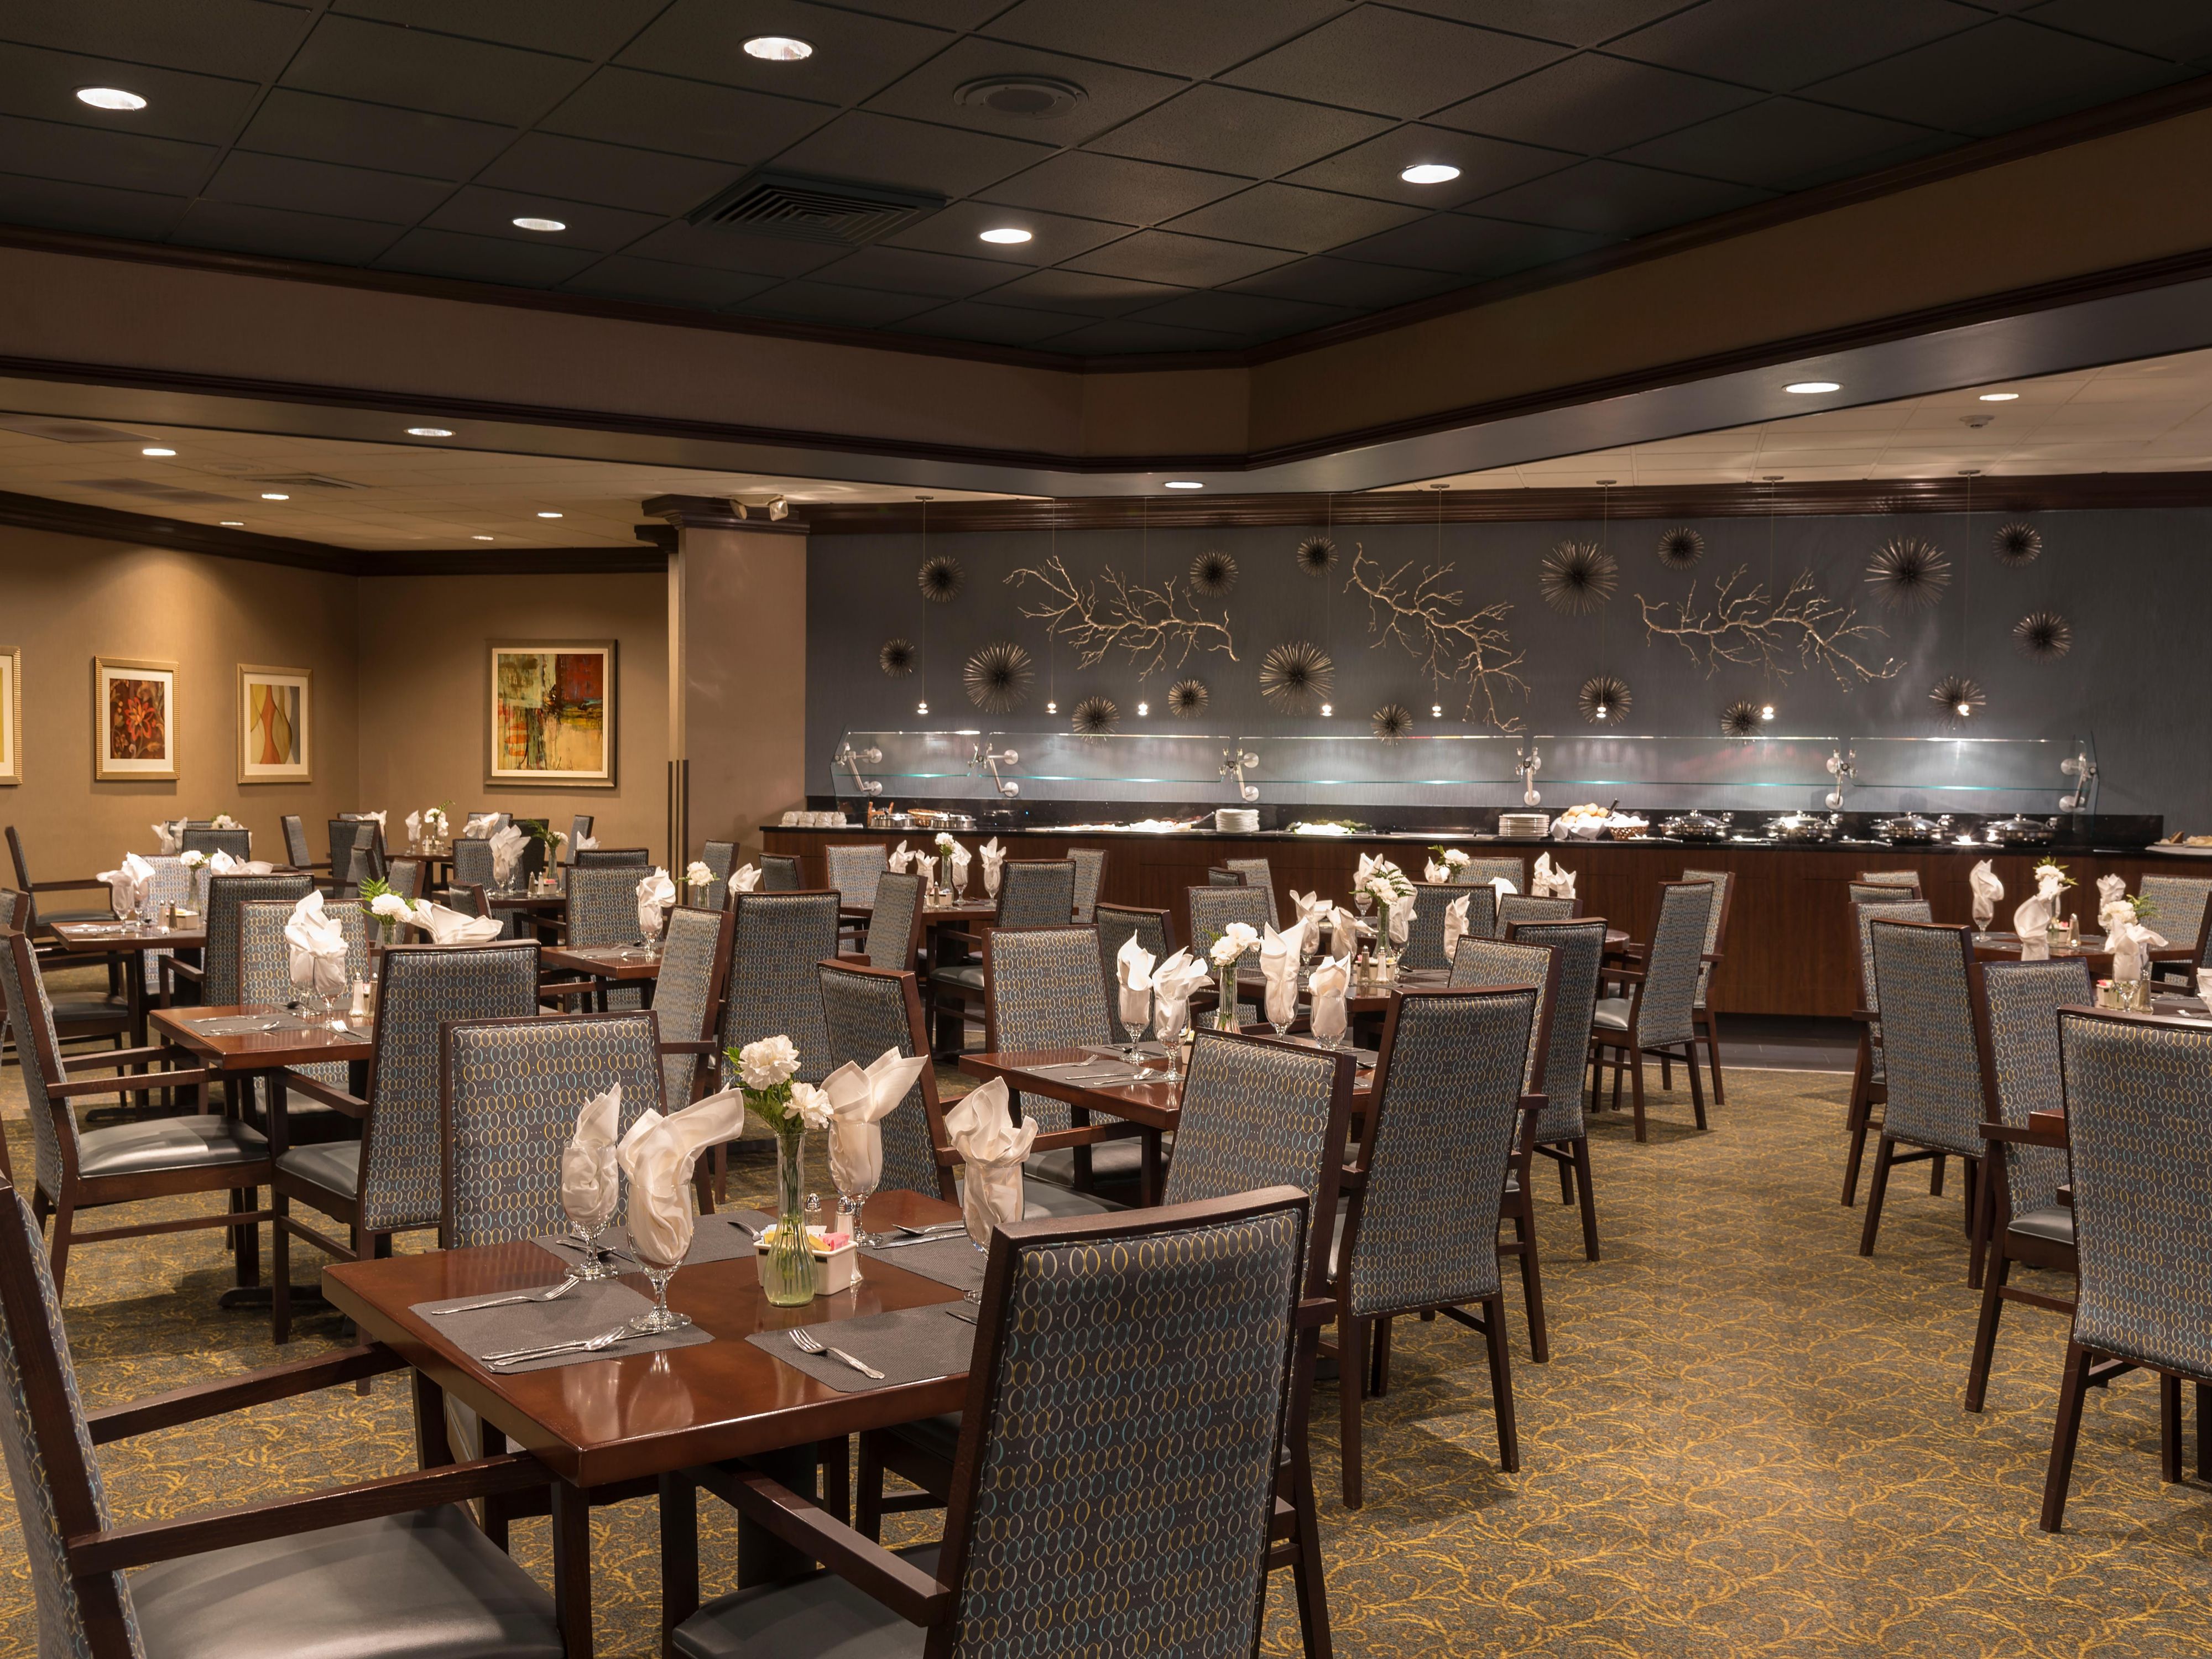 Bonefish Grill and Outback Steakhouse are just two of the options available, with a lot of restaurants within walking distance or a short drive.  Along with our very own Michael's Grille.  Whatever your mood, we have the perfect option only steps away.  